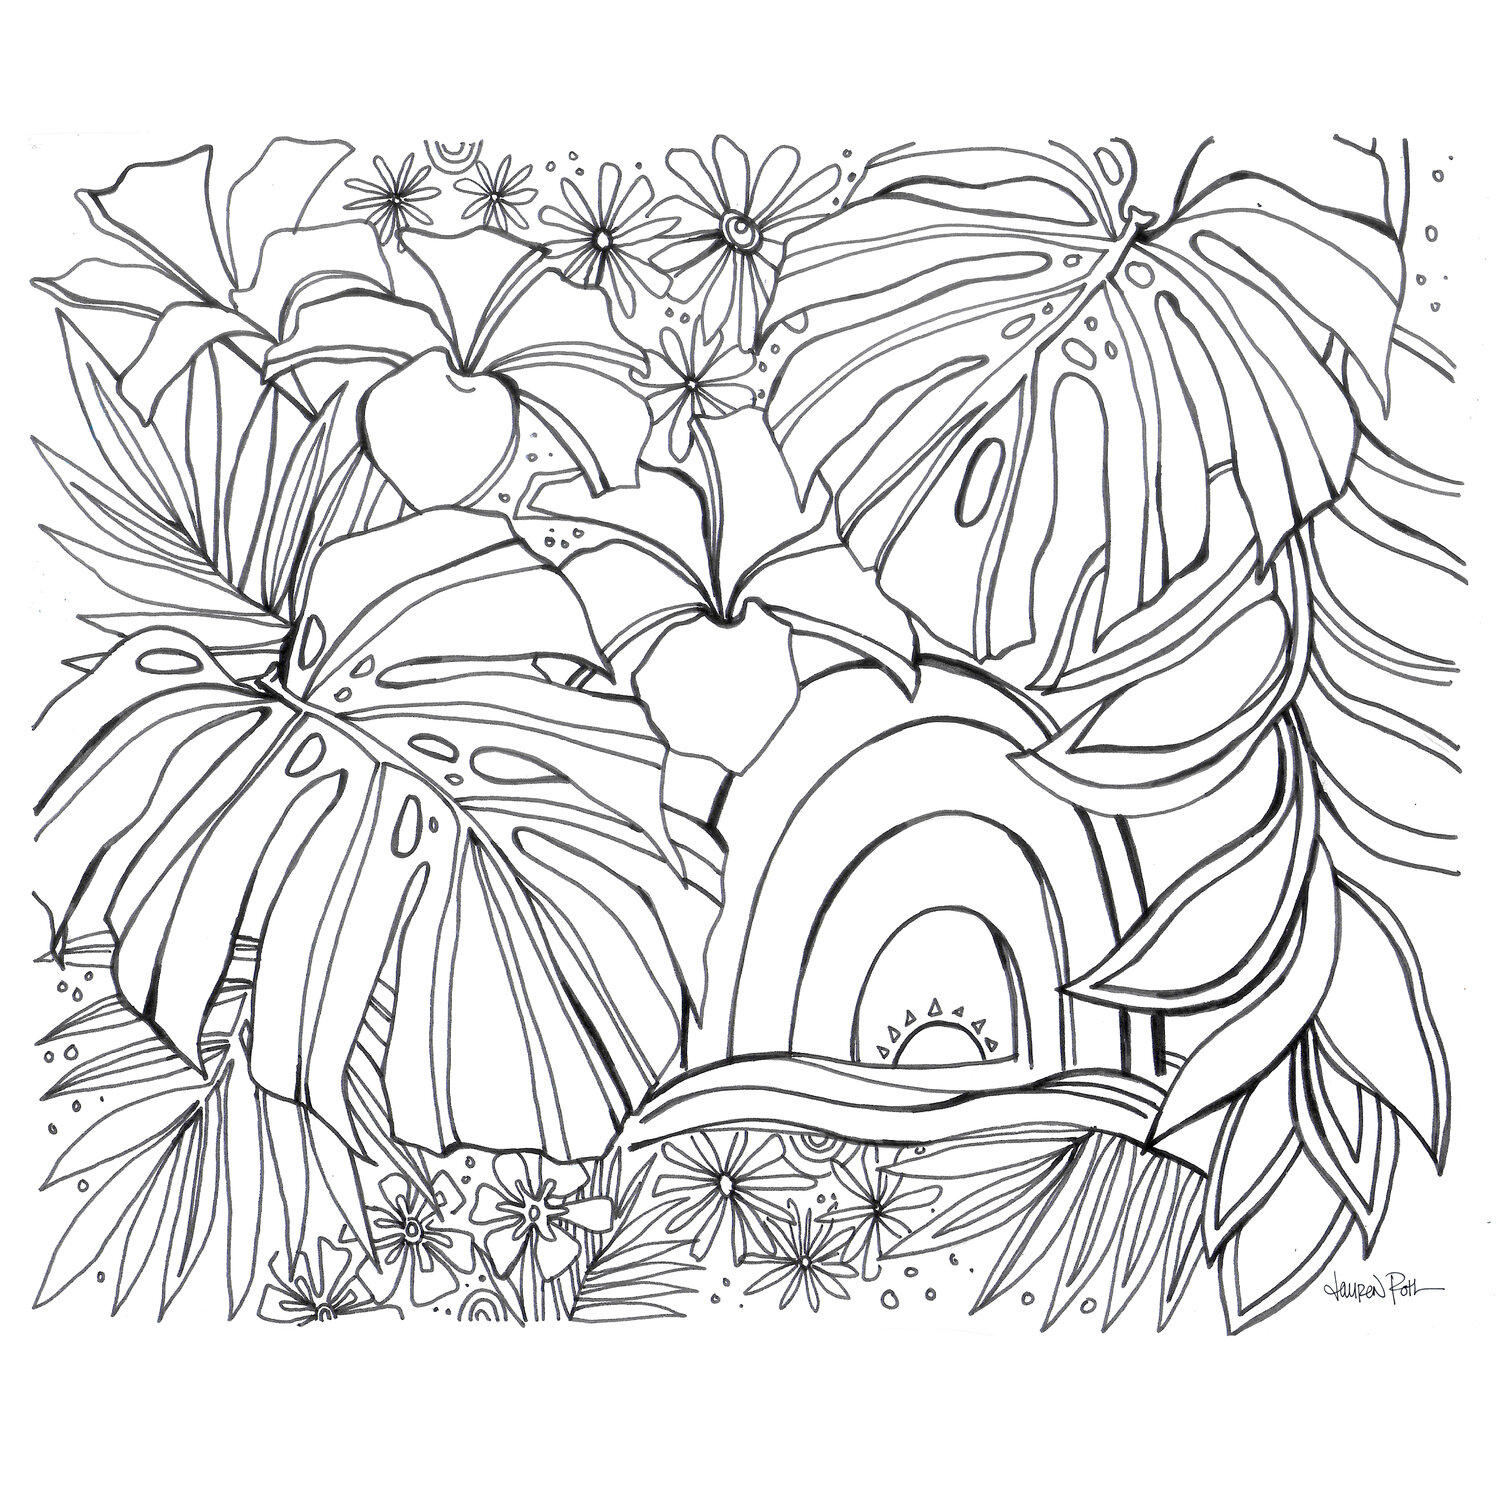 Monstera Dreams FREE Coloring Page — Lauren Roth Art